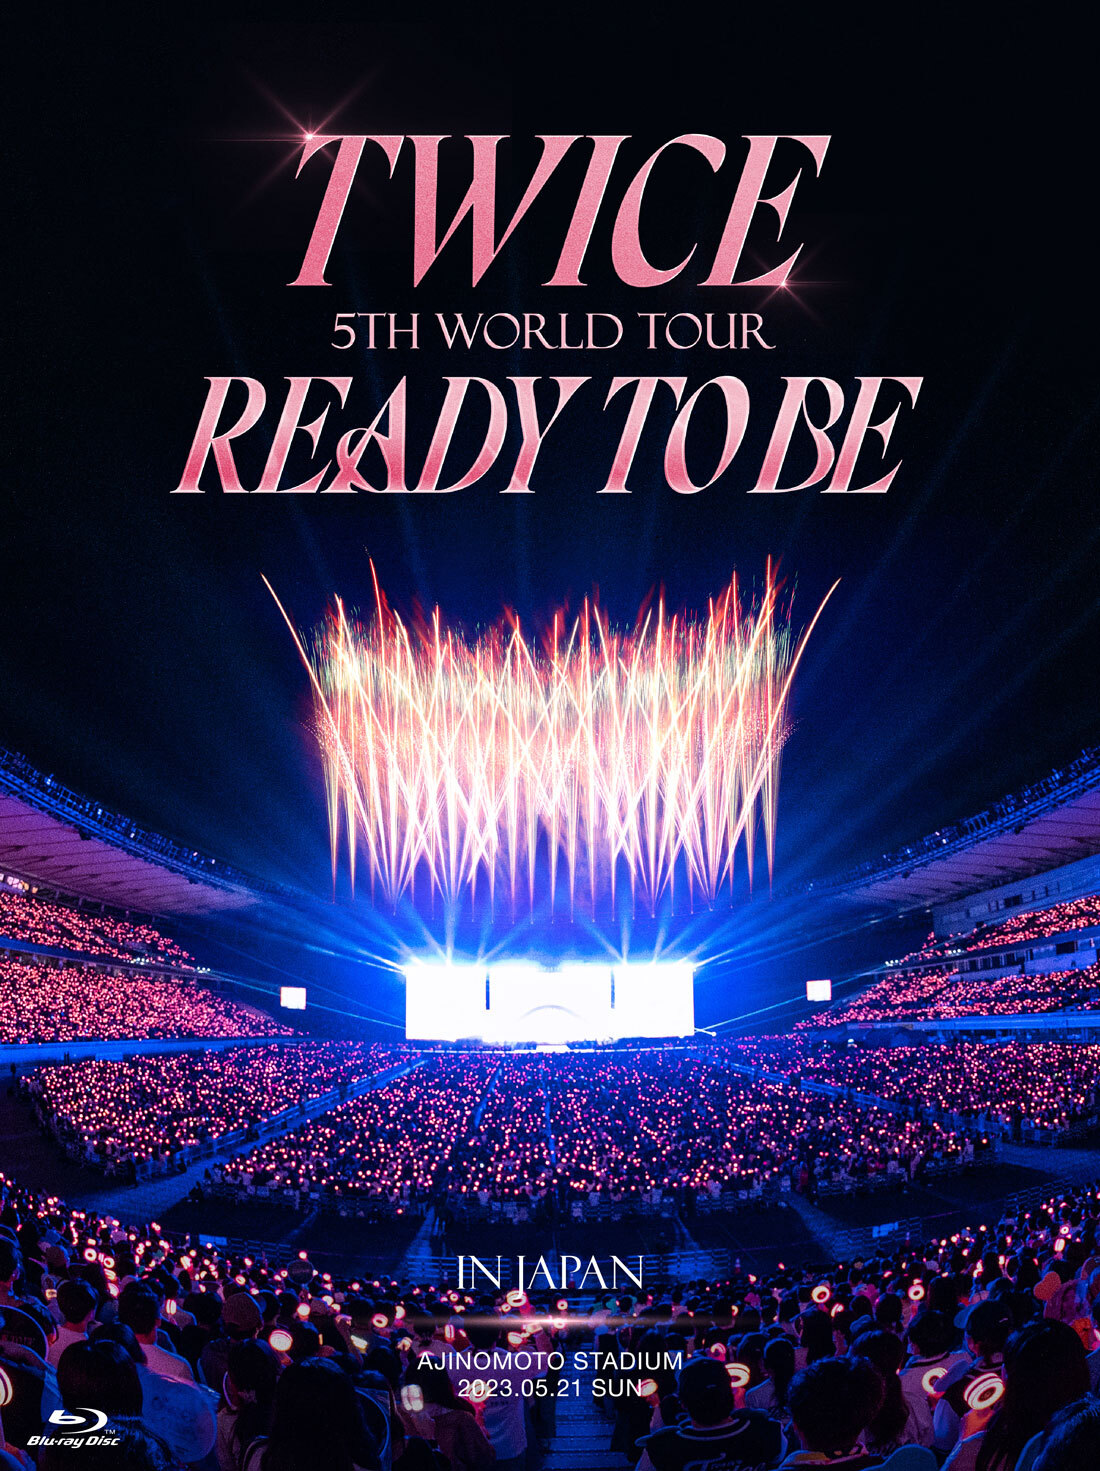 TWICE 5TH WORLD TOUR 'READY TO BE' in JAPAN Blu-ray (Limited 